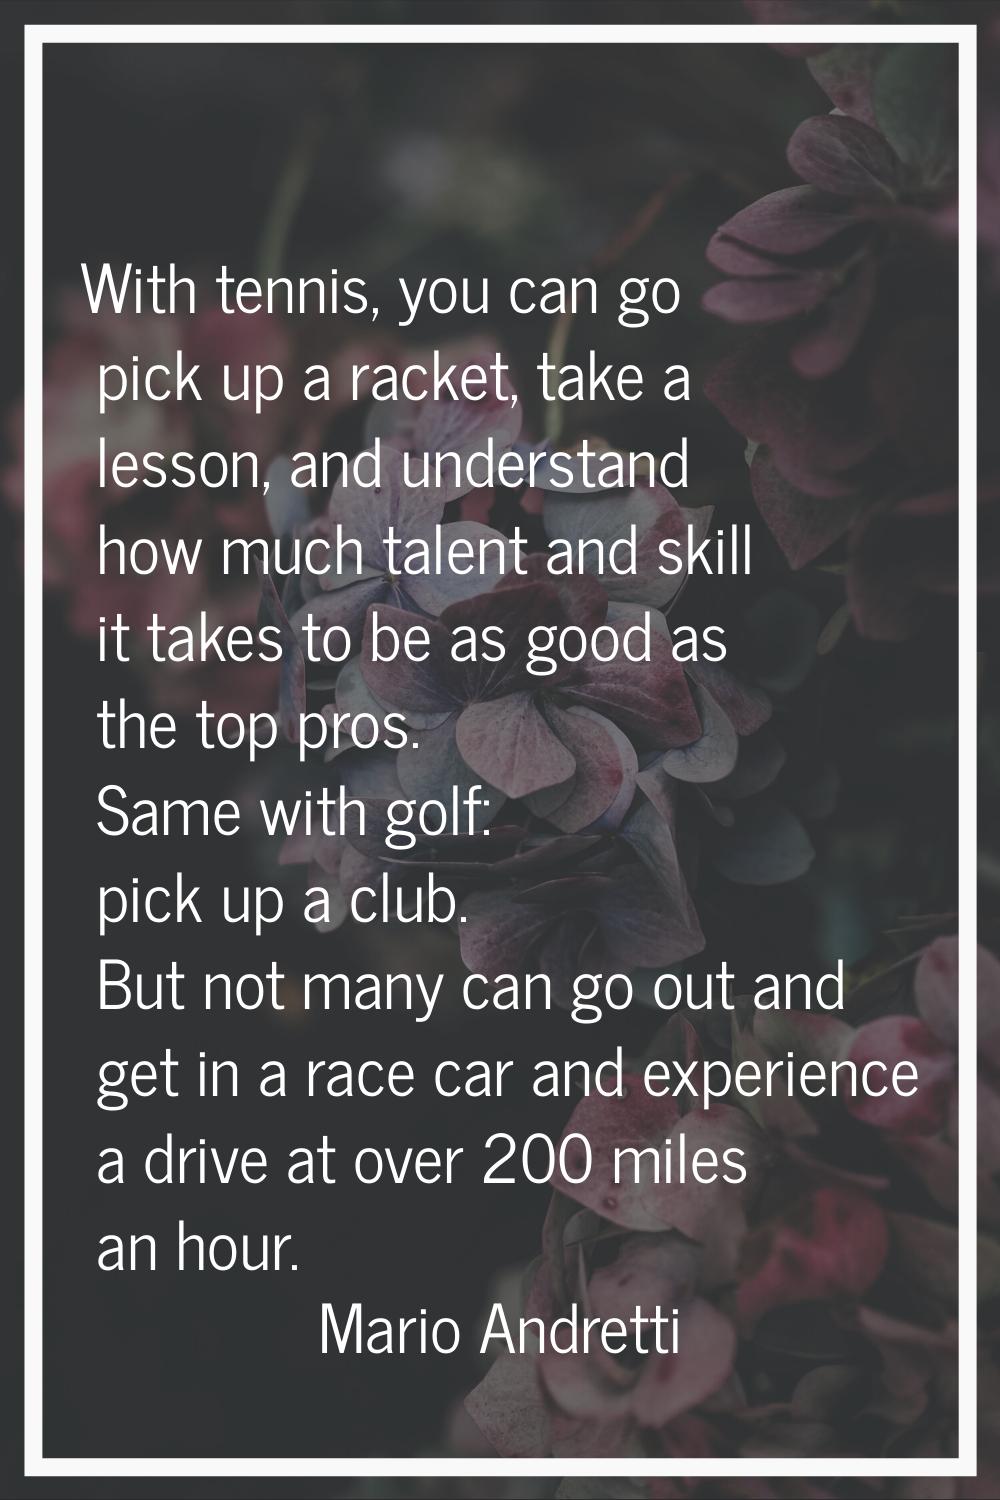 With tennis, you can go pick up a racket, take a lesson, and understand how much talent and skill i